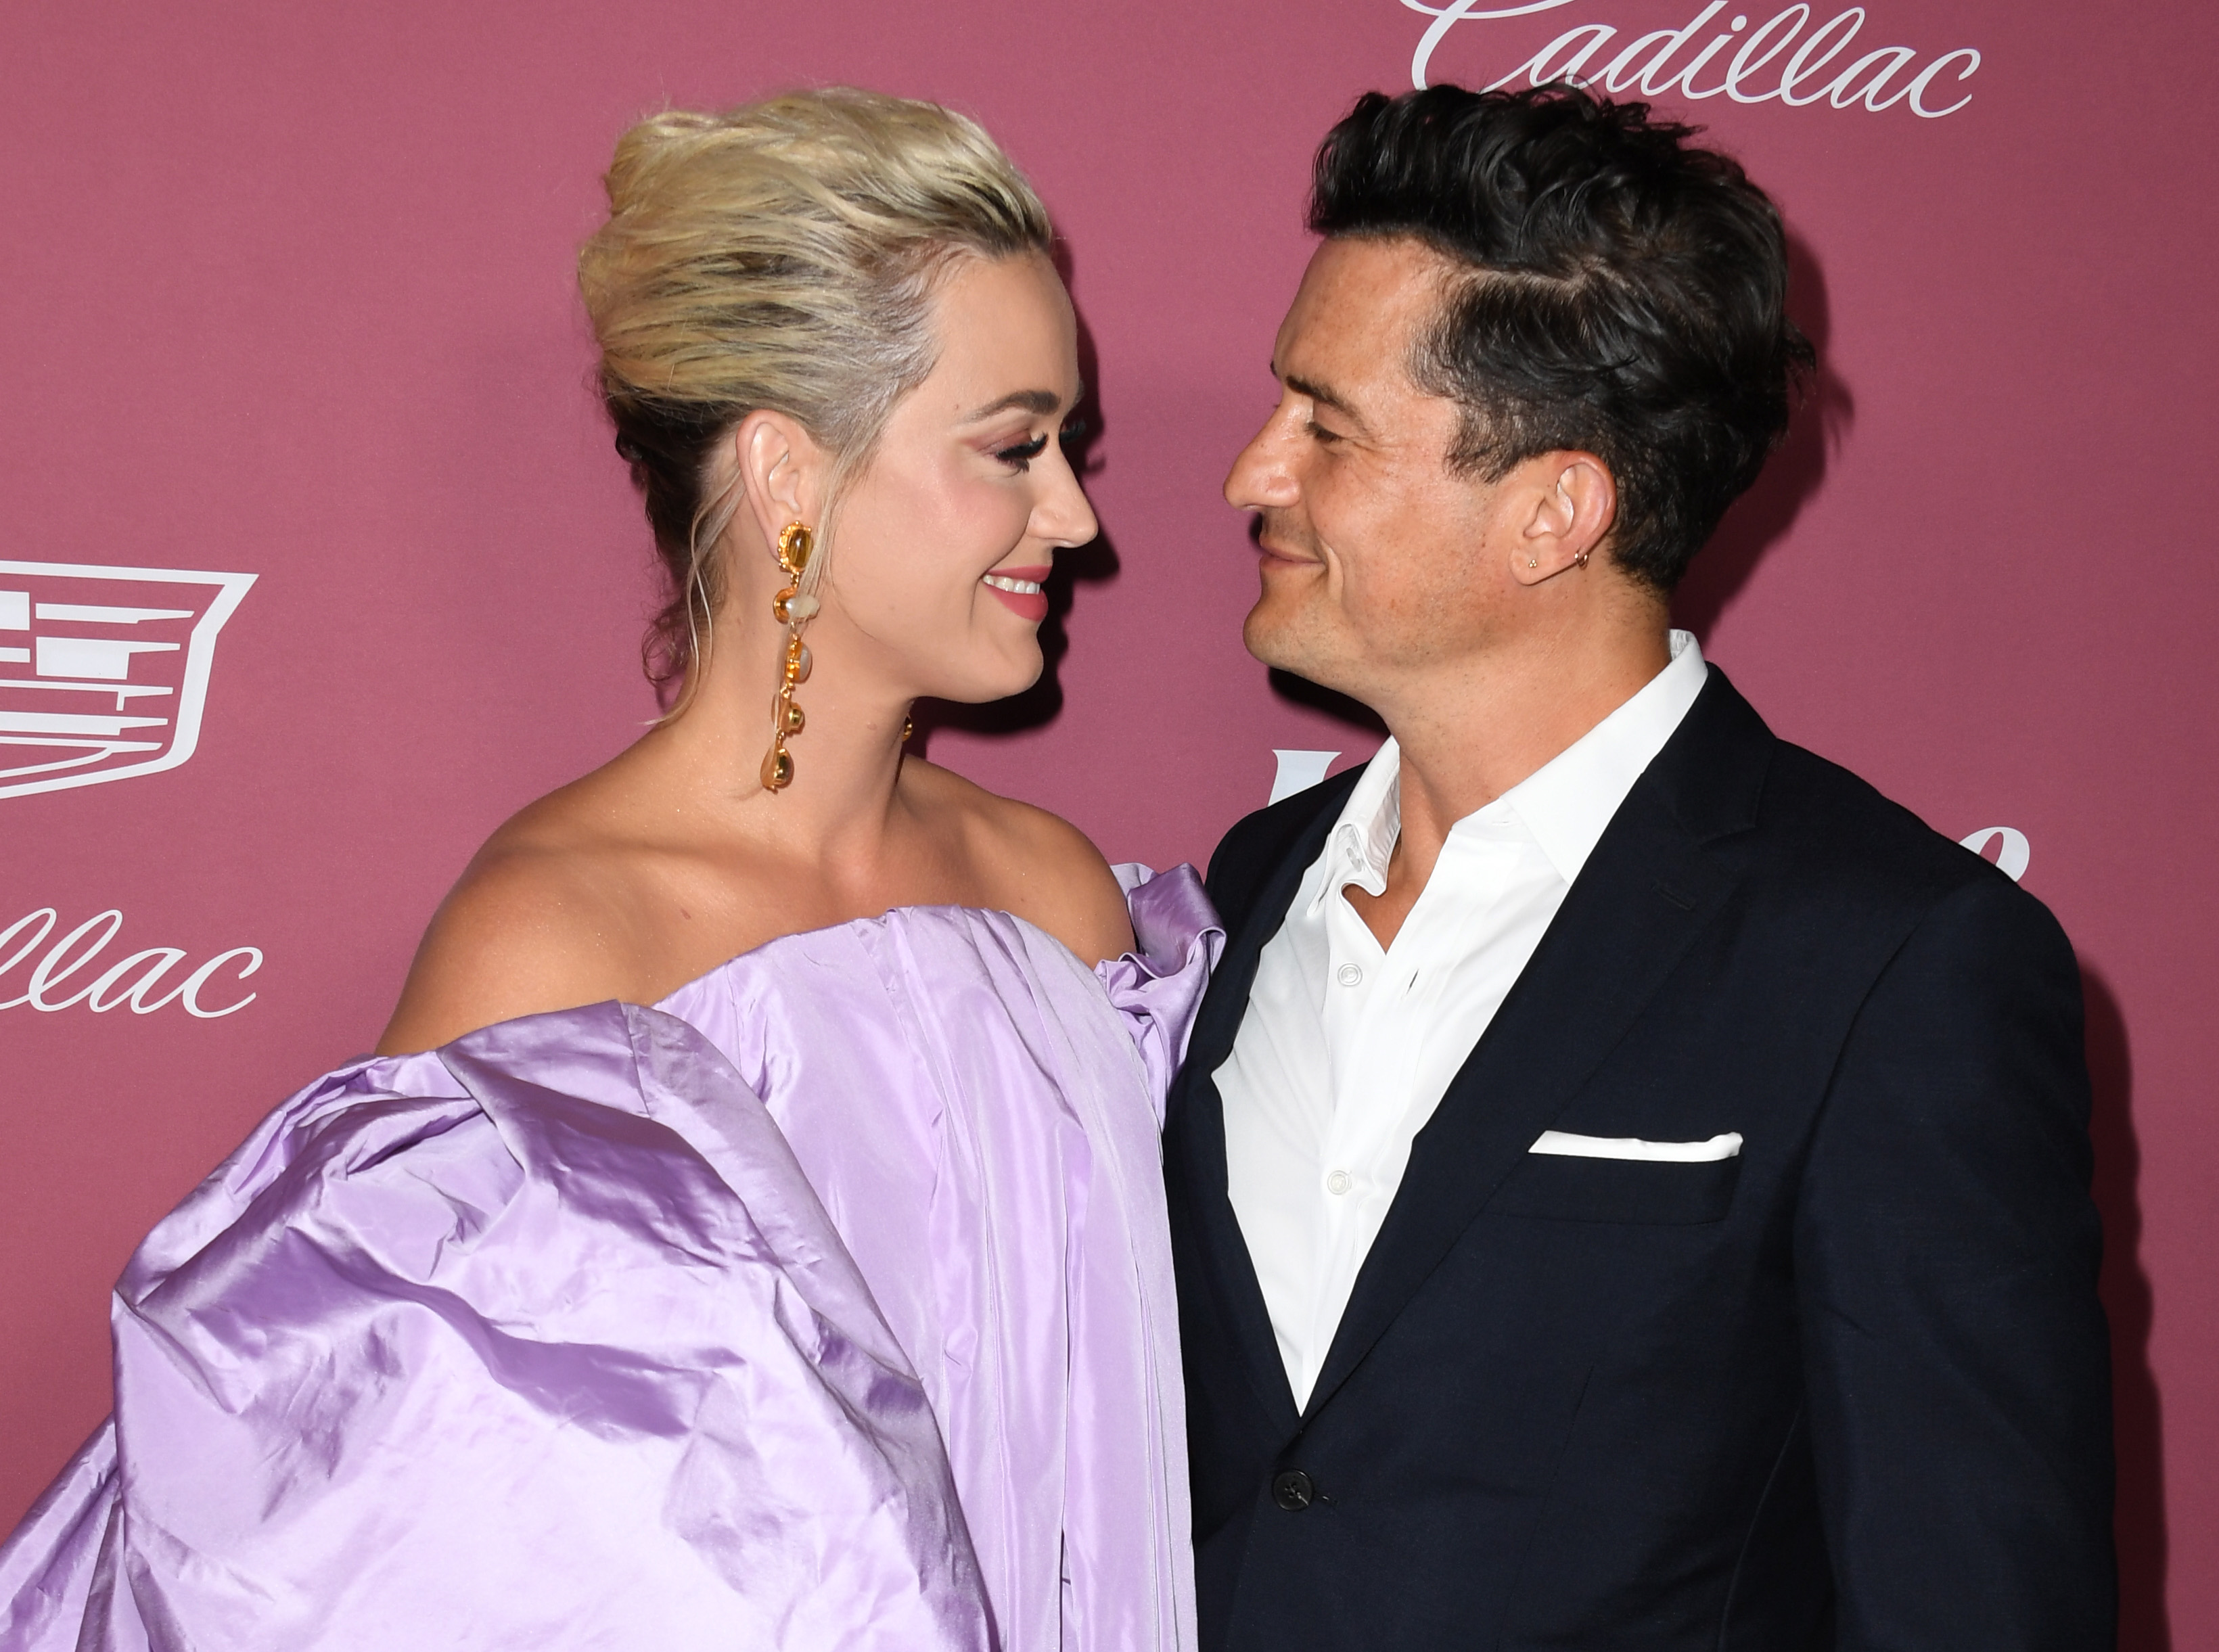 Katy Perry and Orlando Bloom in Beverly Hills, California on September 30, 2021 | Source: Getty Images